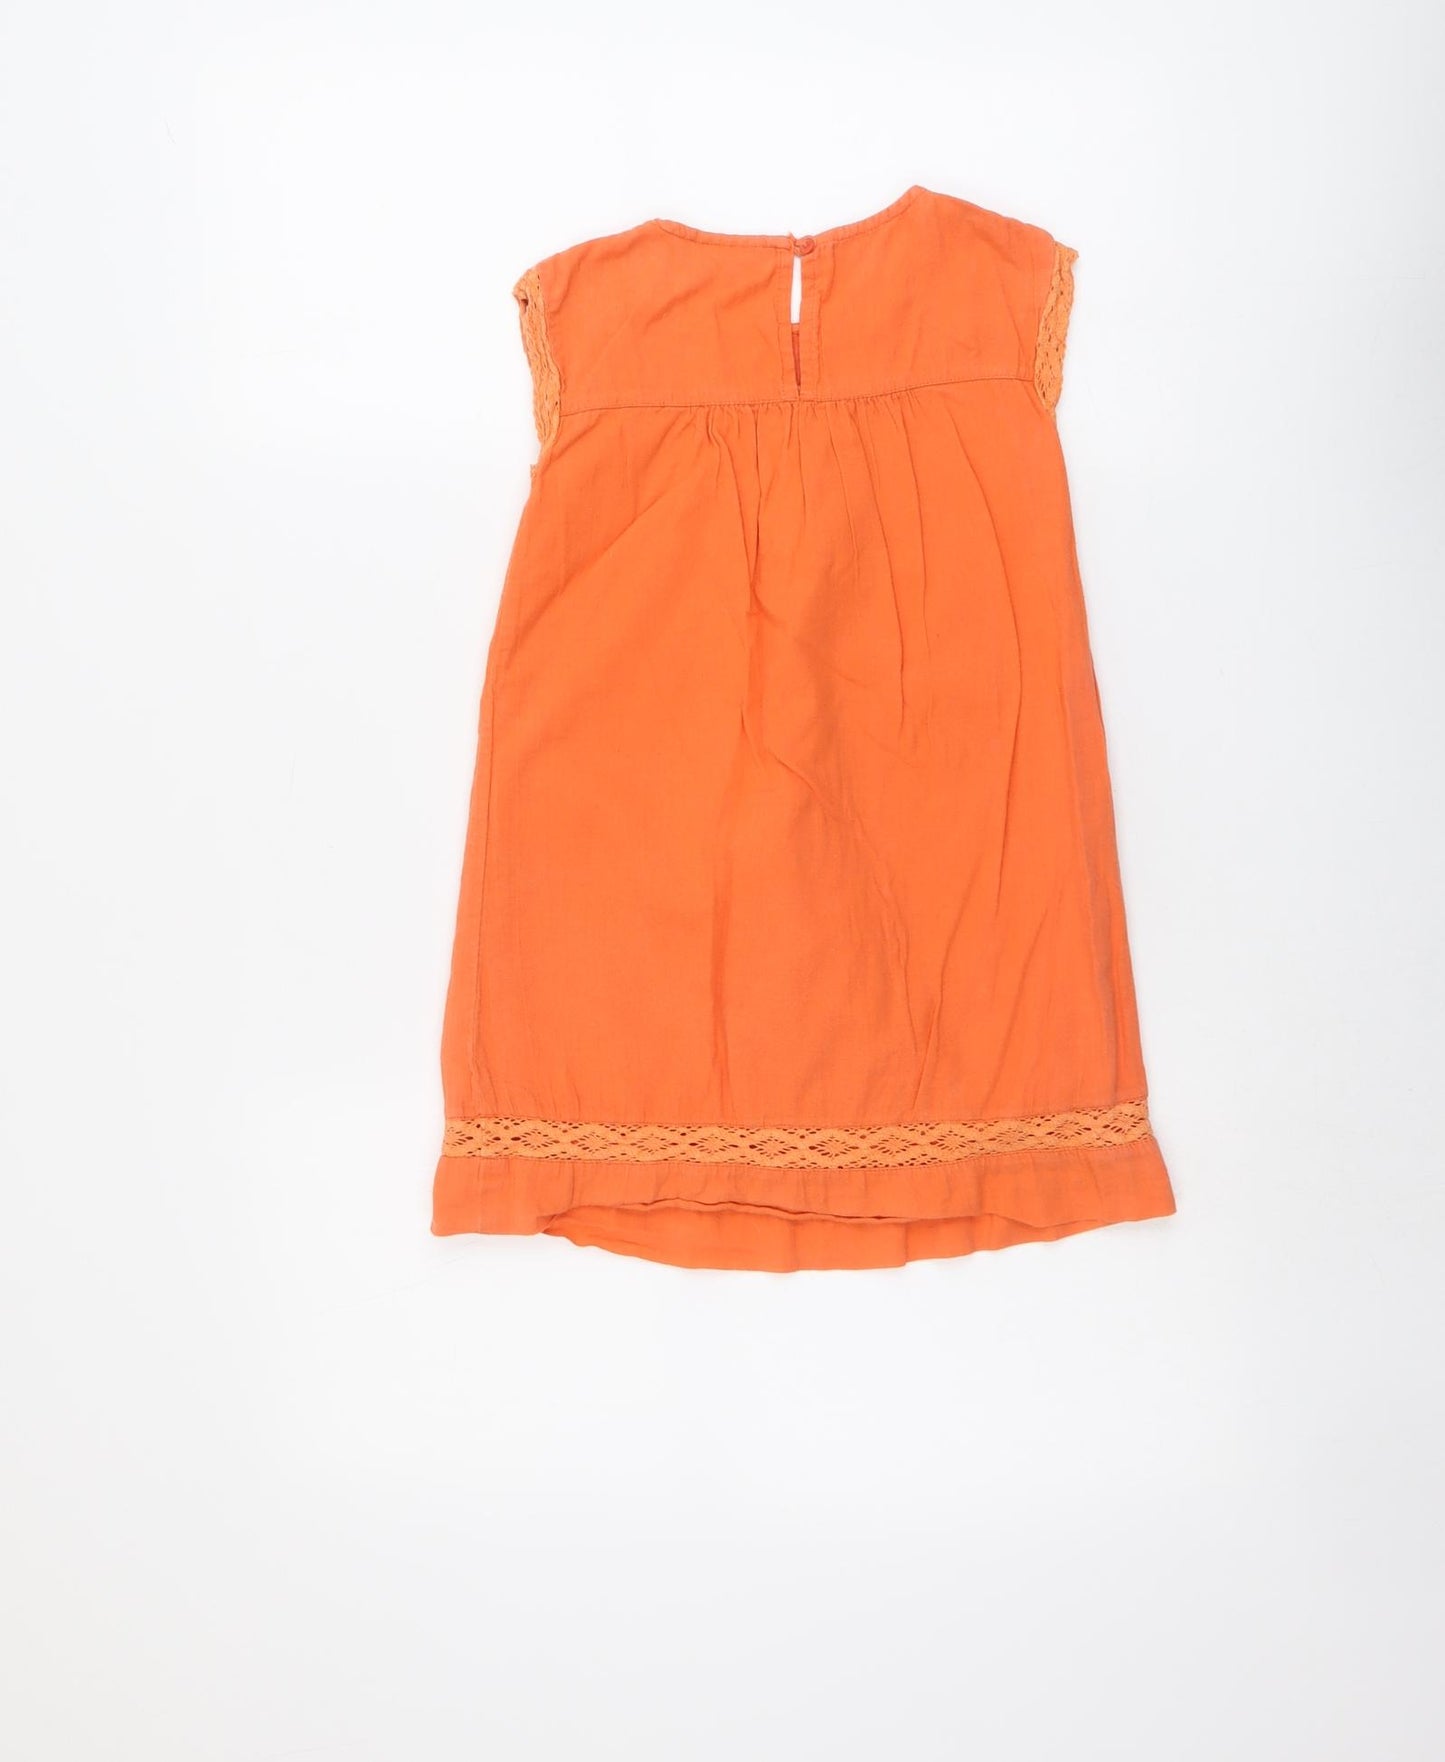 NEXT Girls Orange Cotton A-Line Size 5 Years Boat Neck Button - Crocheted Lace Detail